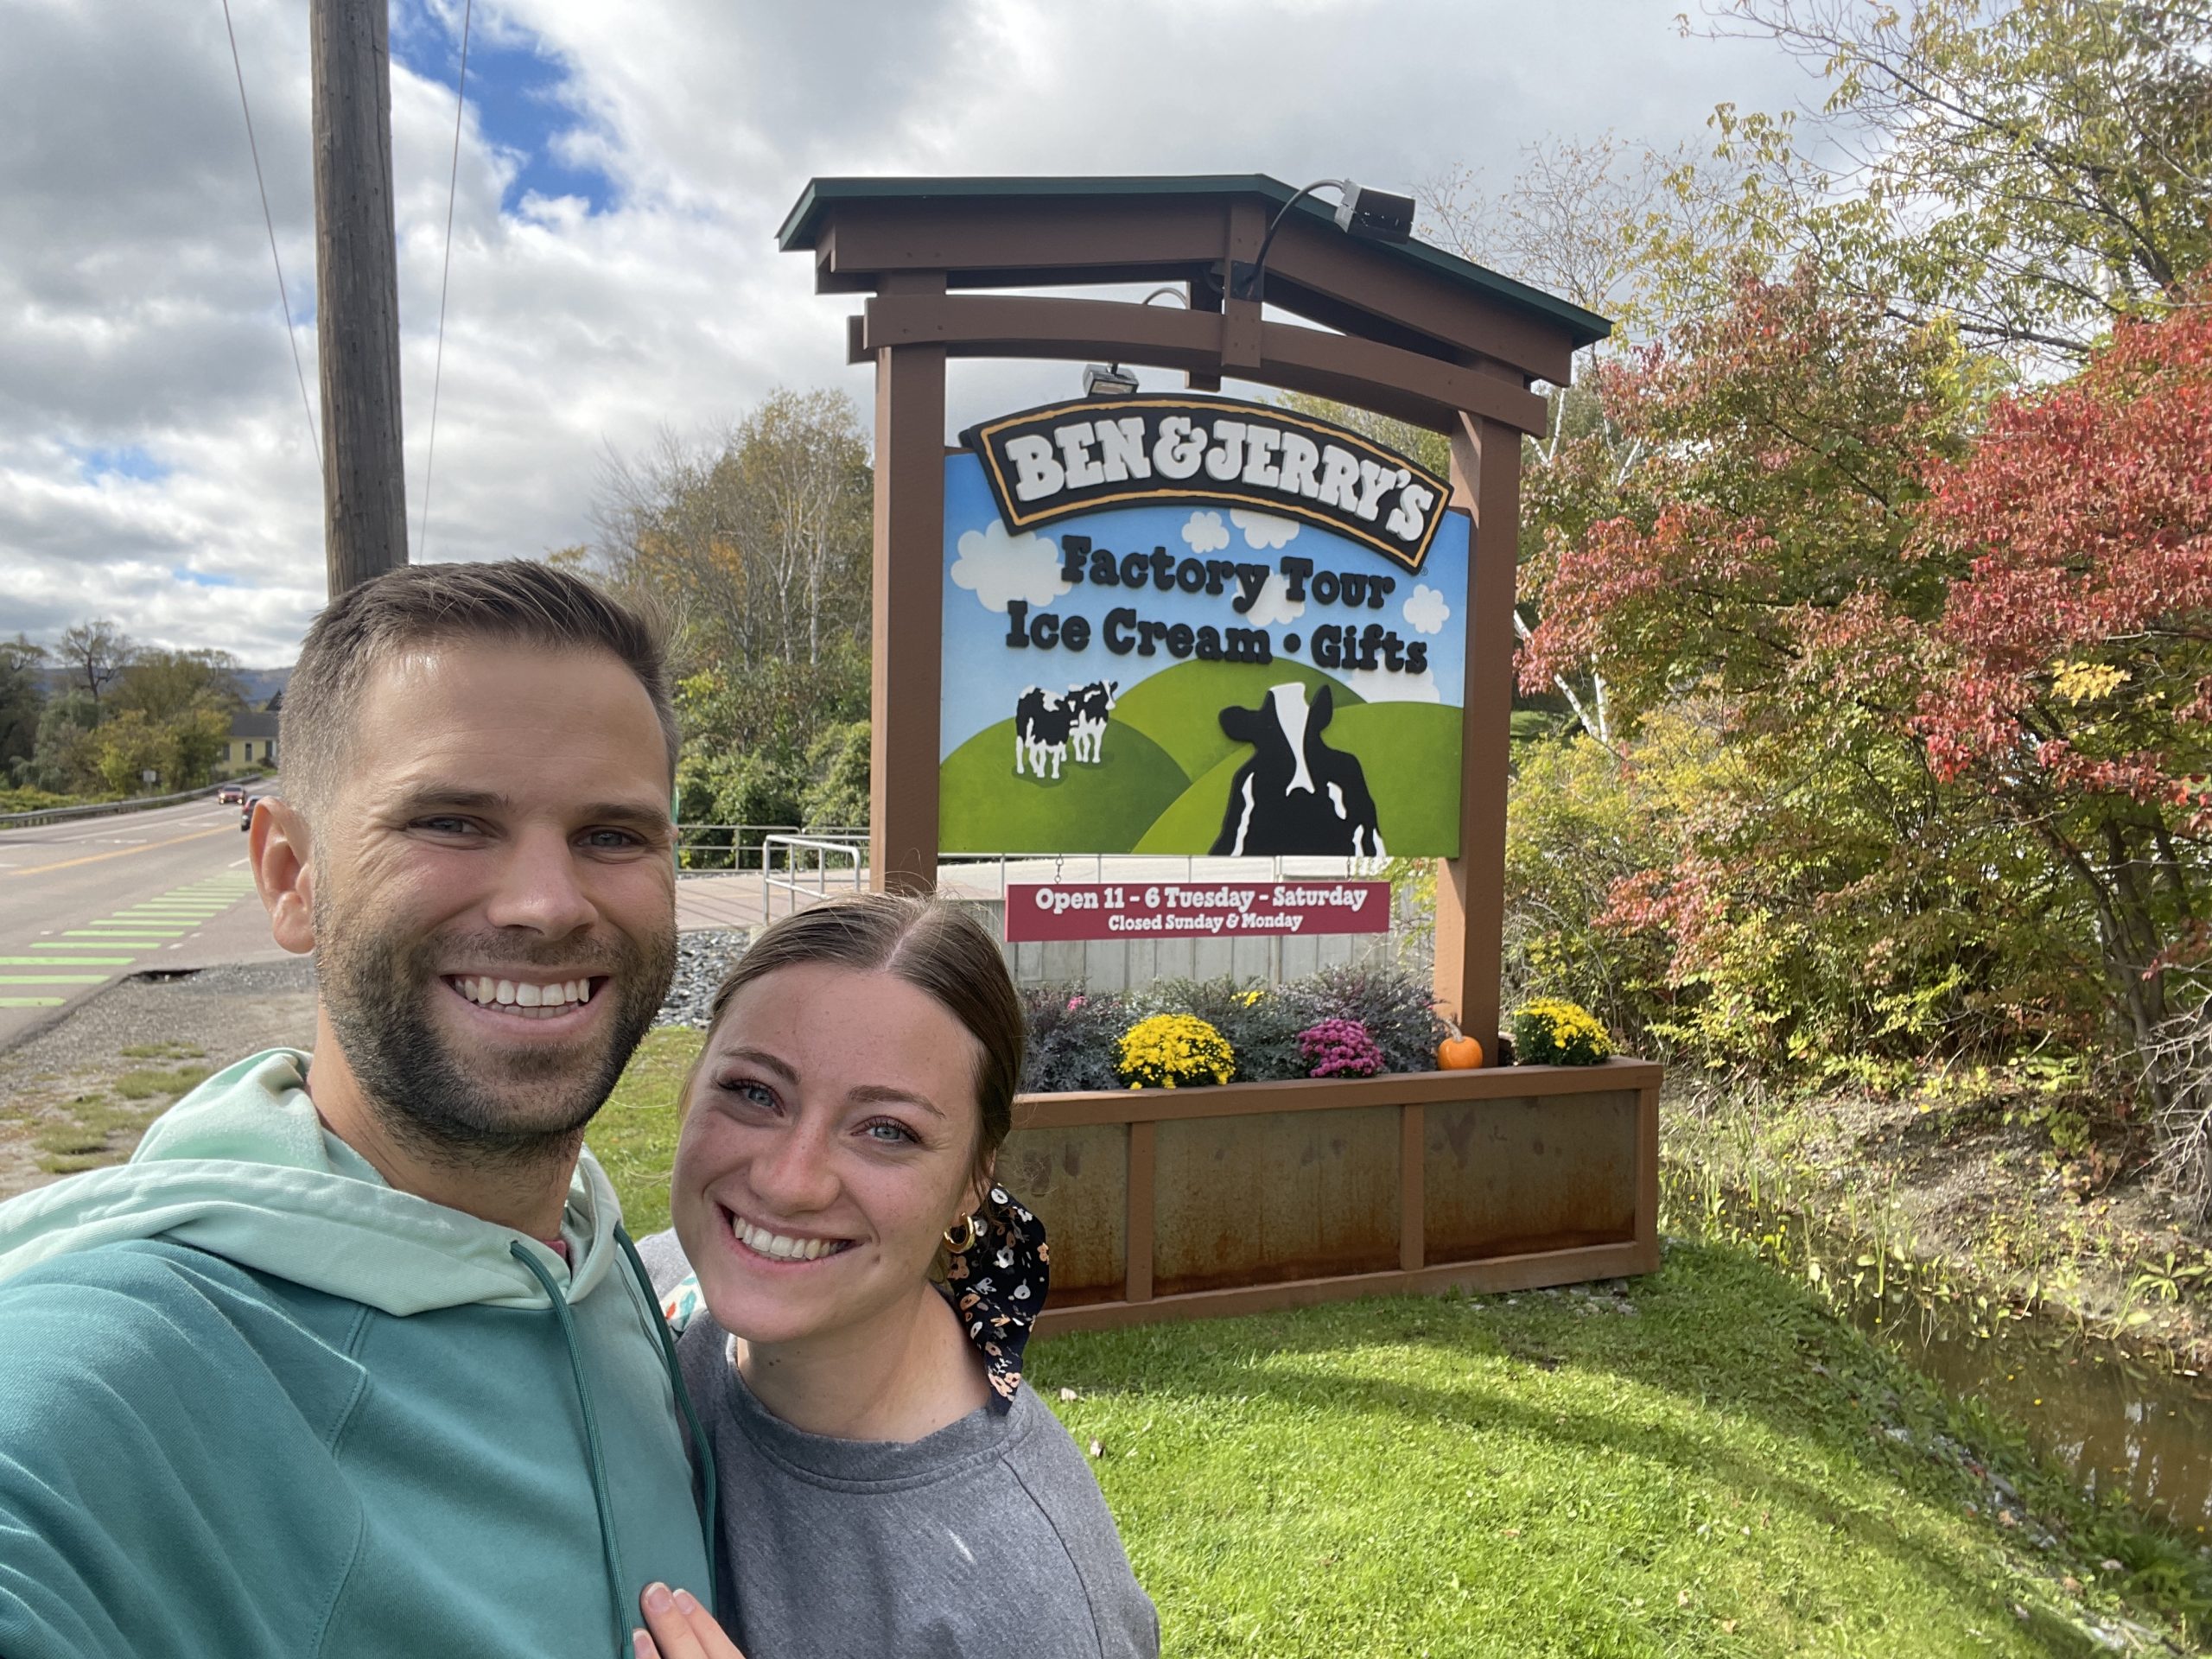 One of the best experiences was Ben & Jerry's Factory tour.